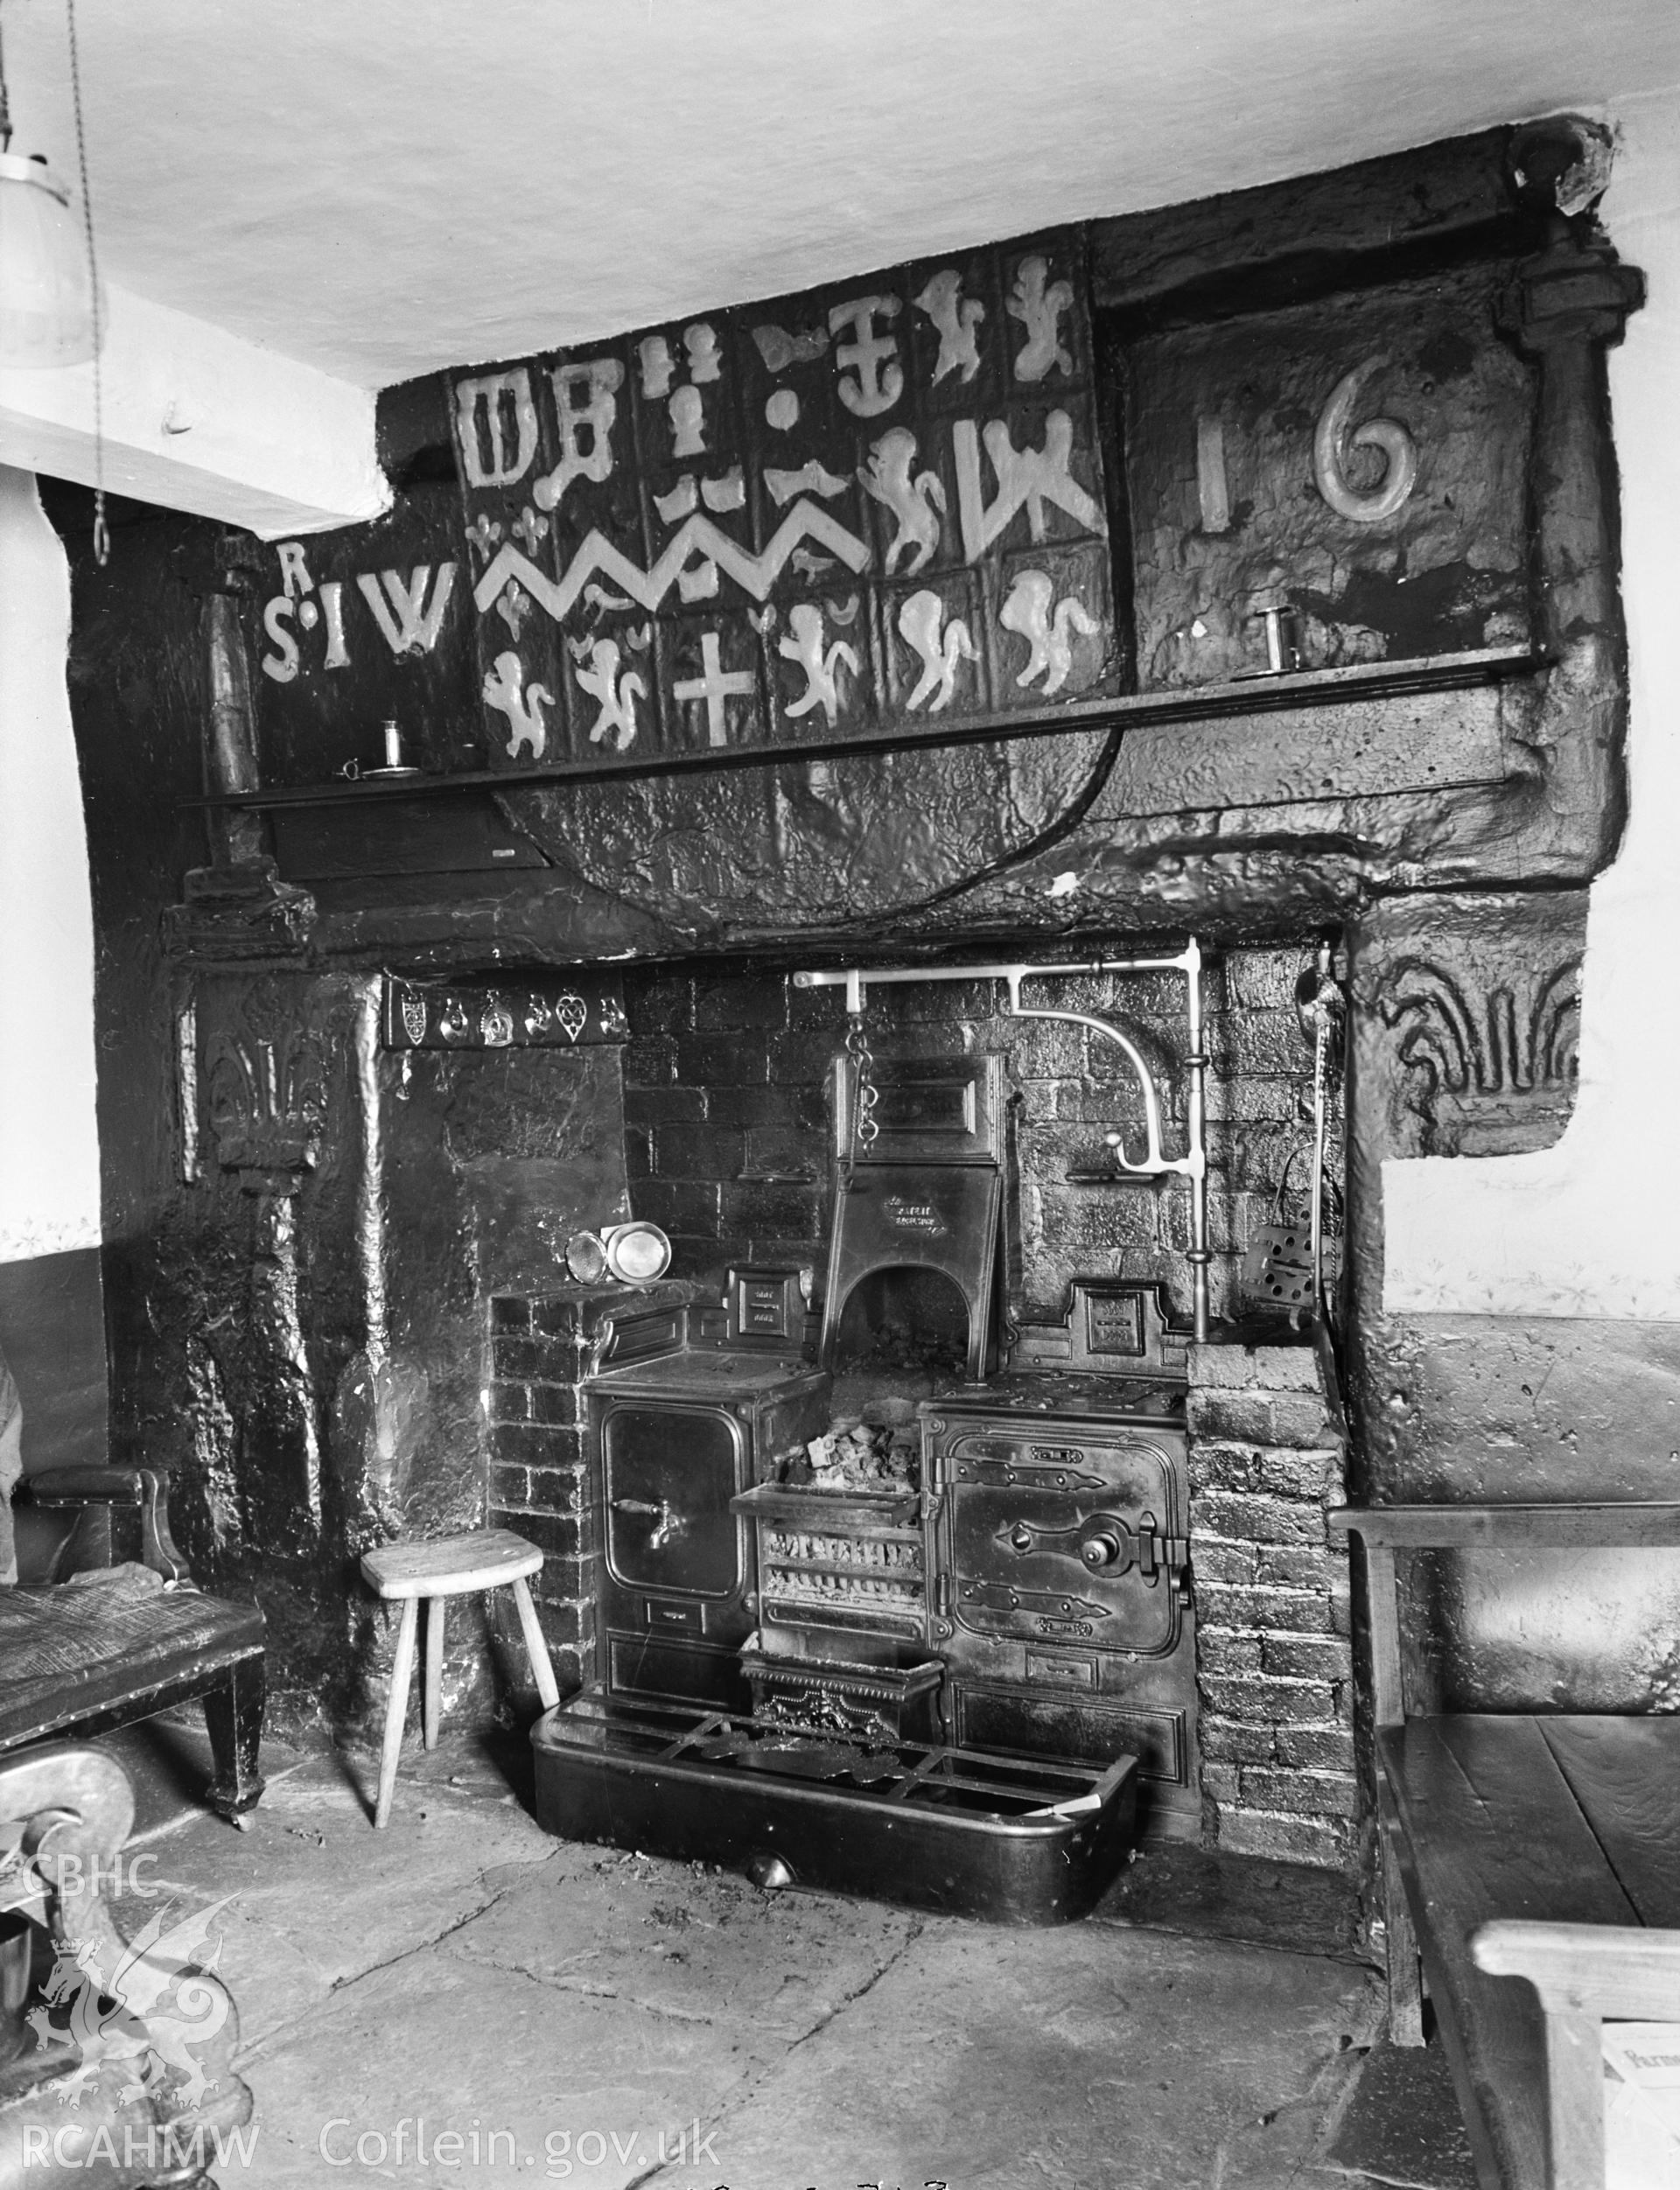 Kitchen fireplace, above which is a coat of arms the number 16 and the letters RSIW.